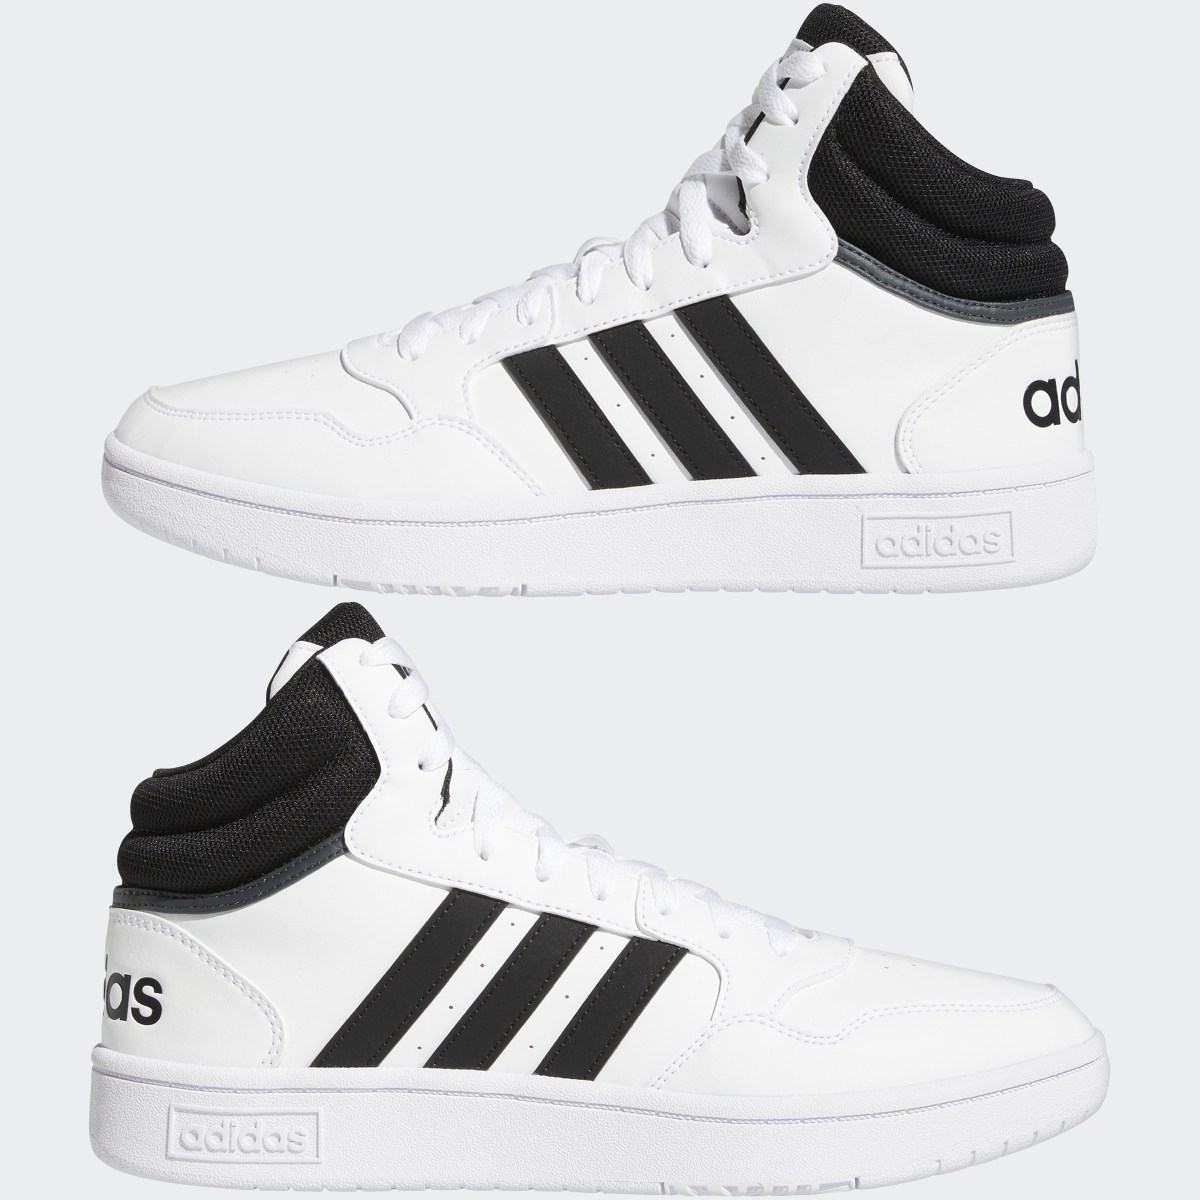 Adidas Hoops 3.0 Mid Classic Vintage Shoes. 8